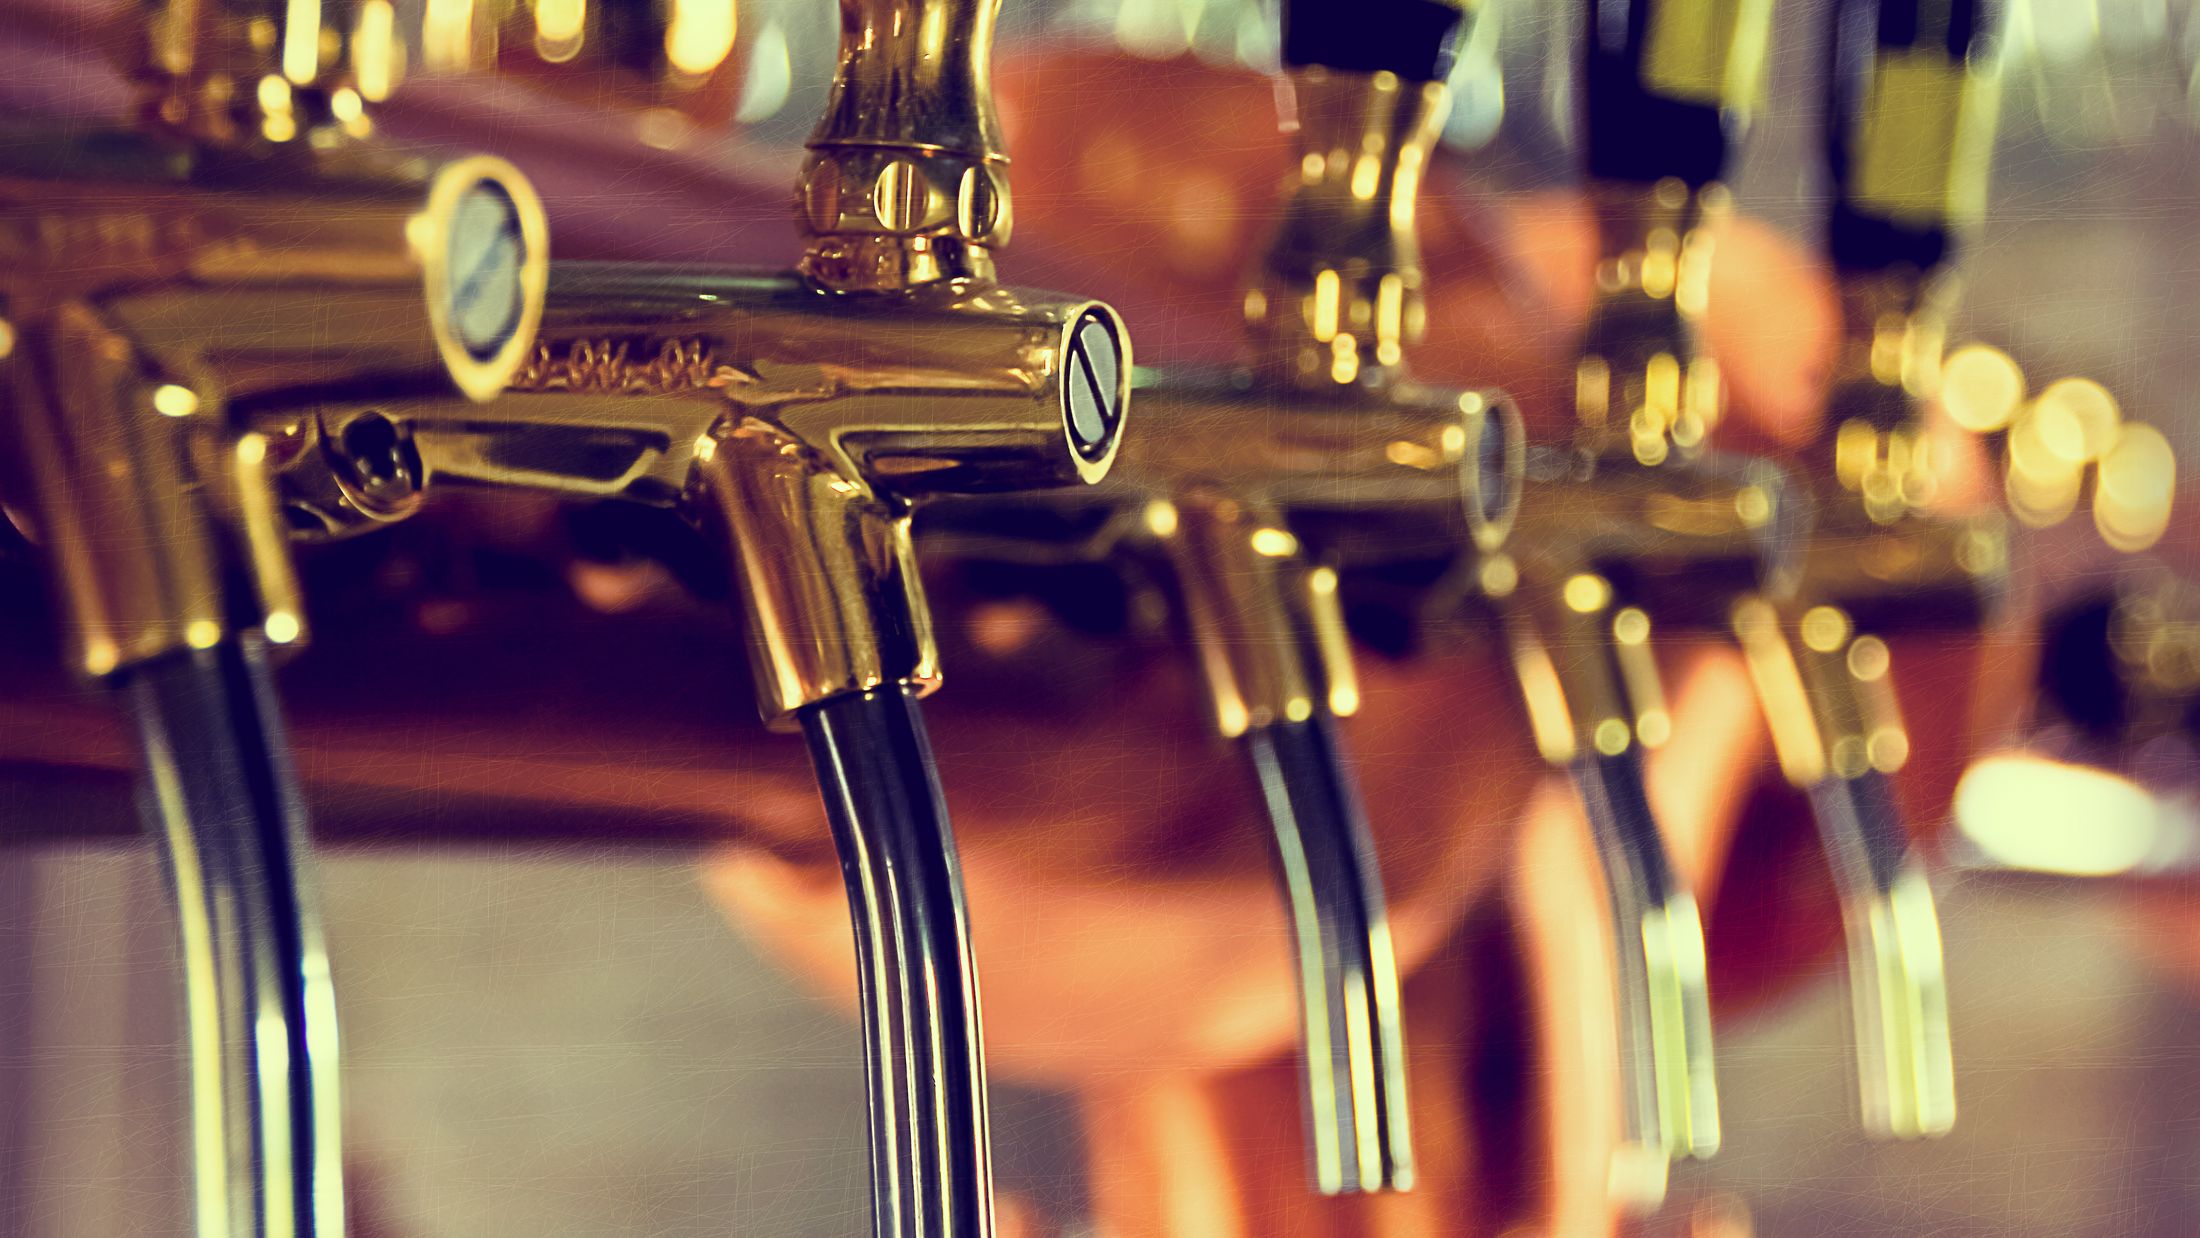 Beer tap; Shutterstock ID 263923439; PO: Project Italy - Facilities images; Job: Project Italy - Facilities images; Client: H&J/Citalia